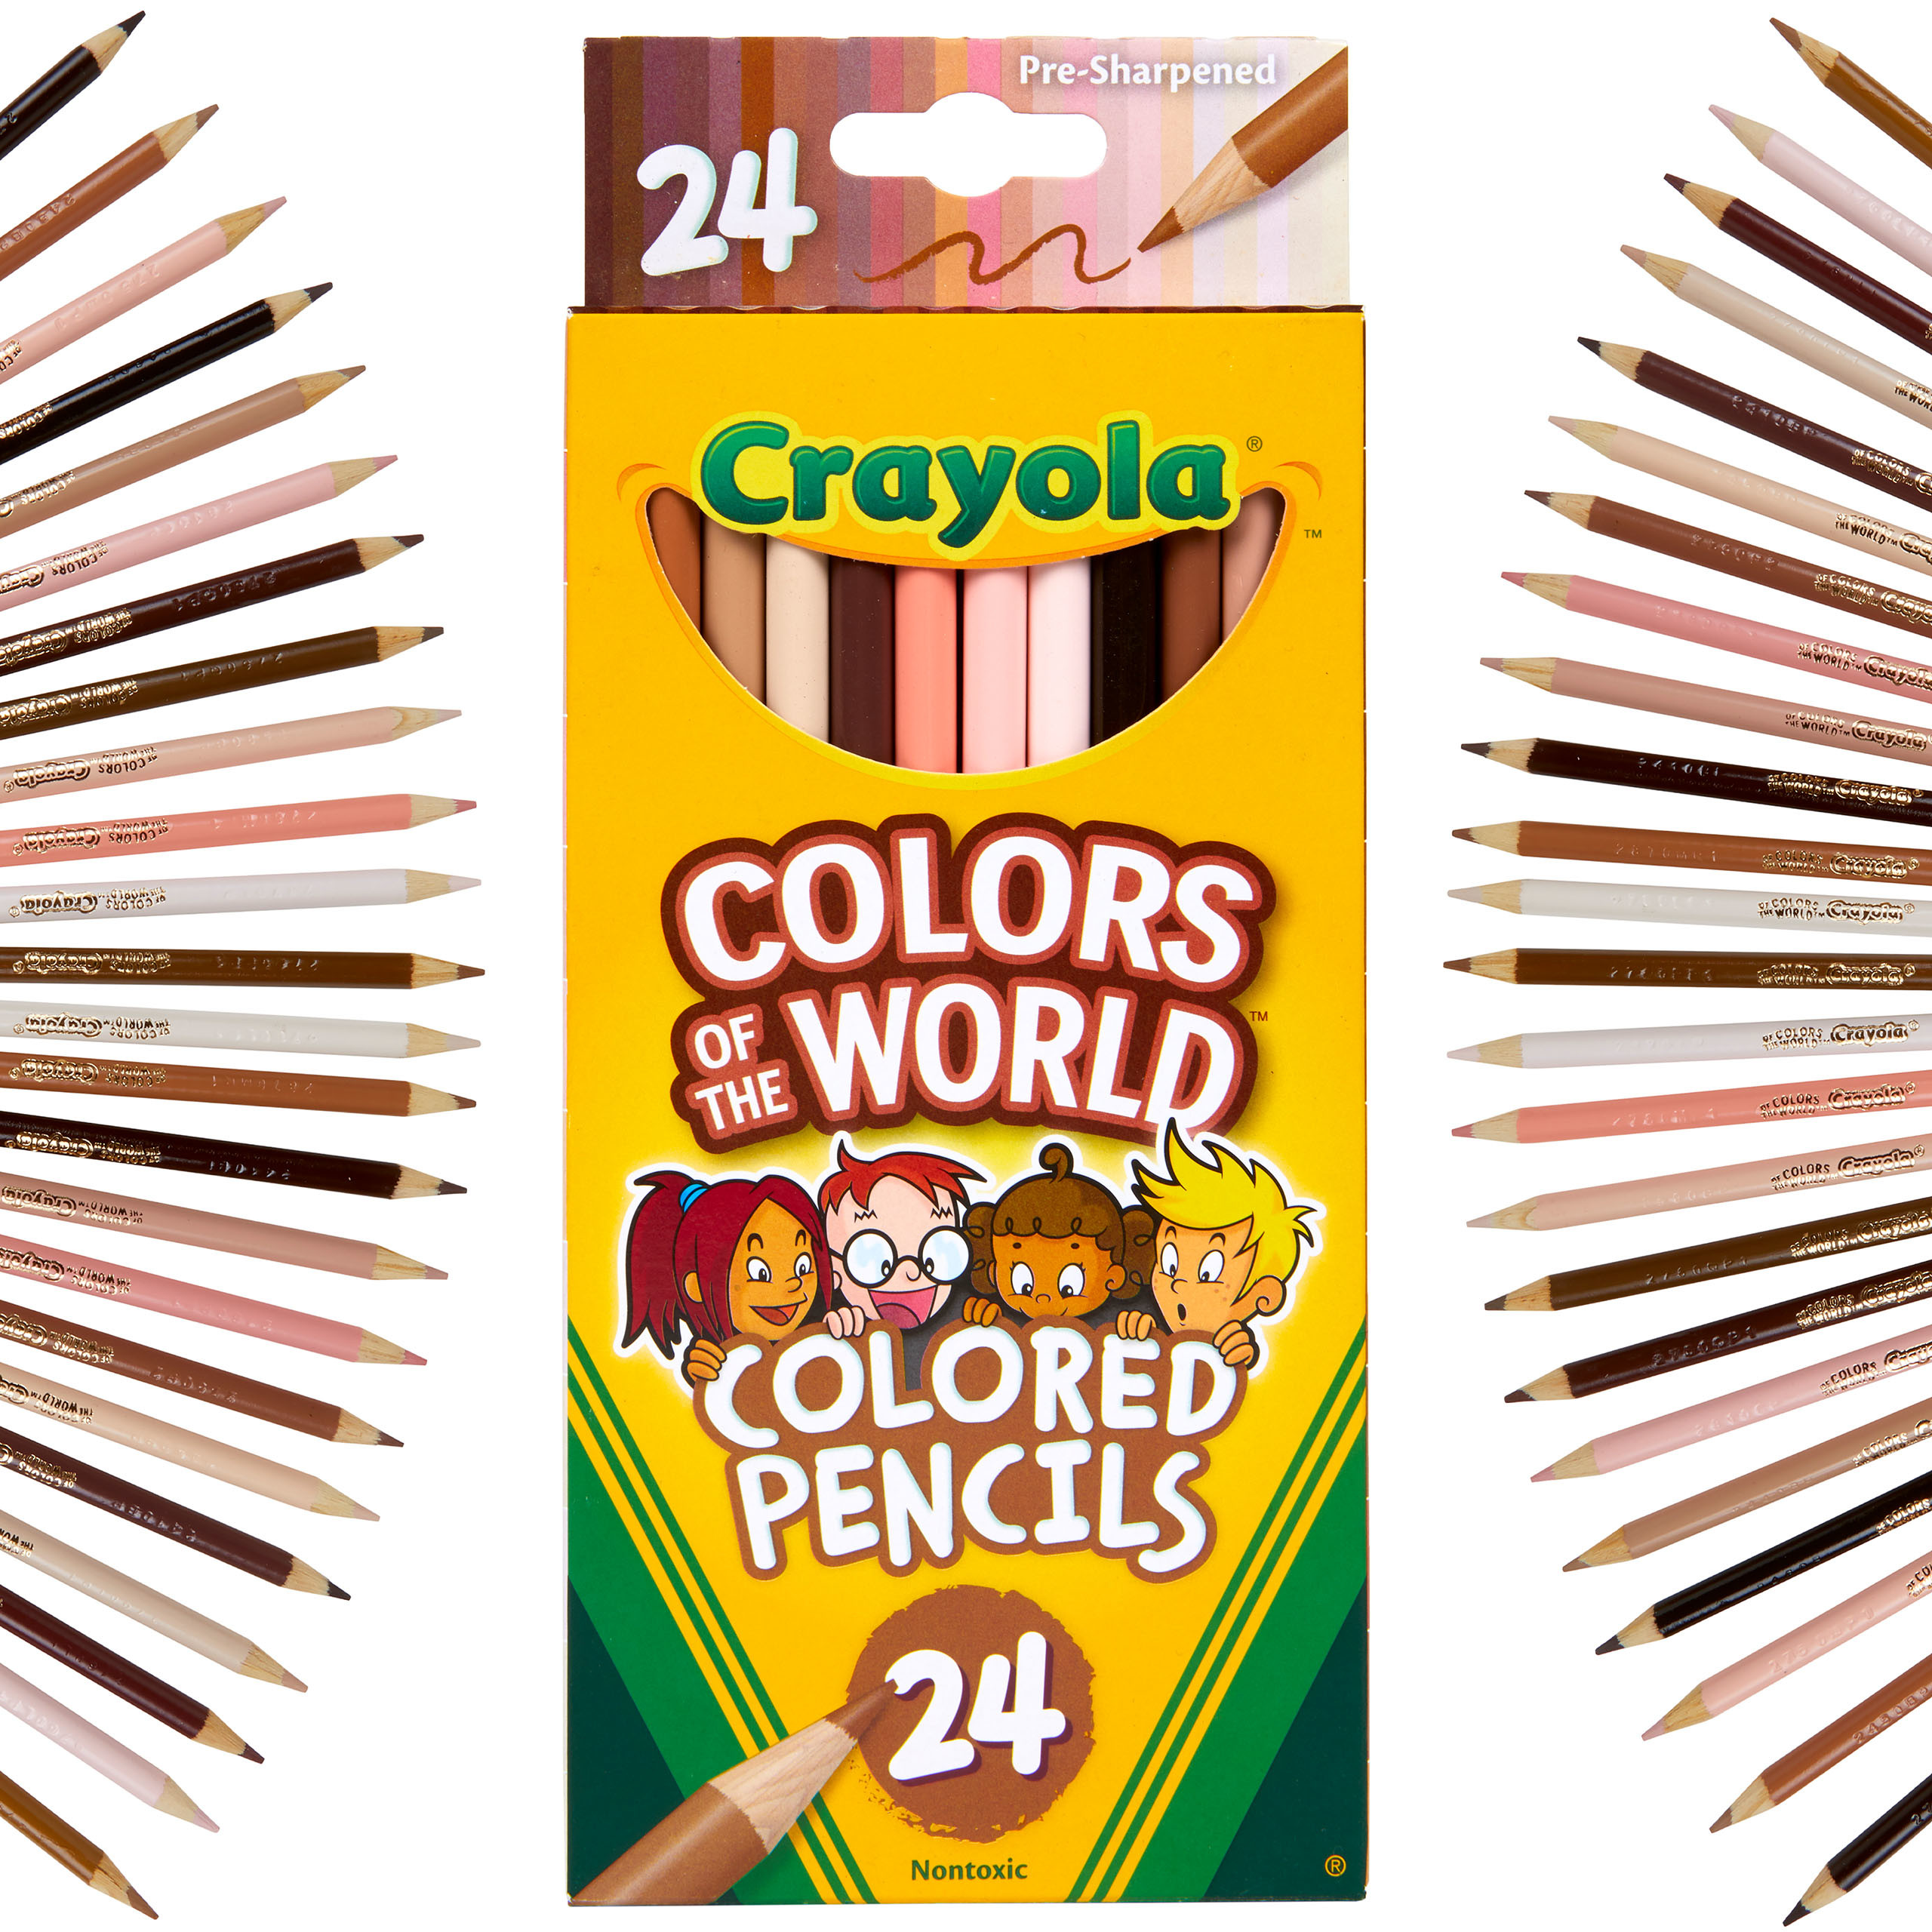 Crayola Colored Pencils 24 Pack, Colors of the World, Skin Tone Colored Pencils, 24 Colors, Child - image 5 of 8